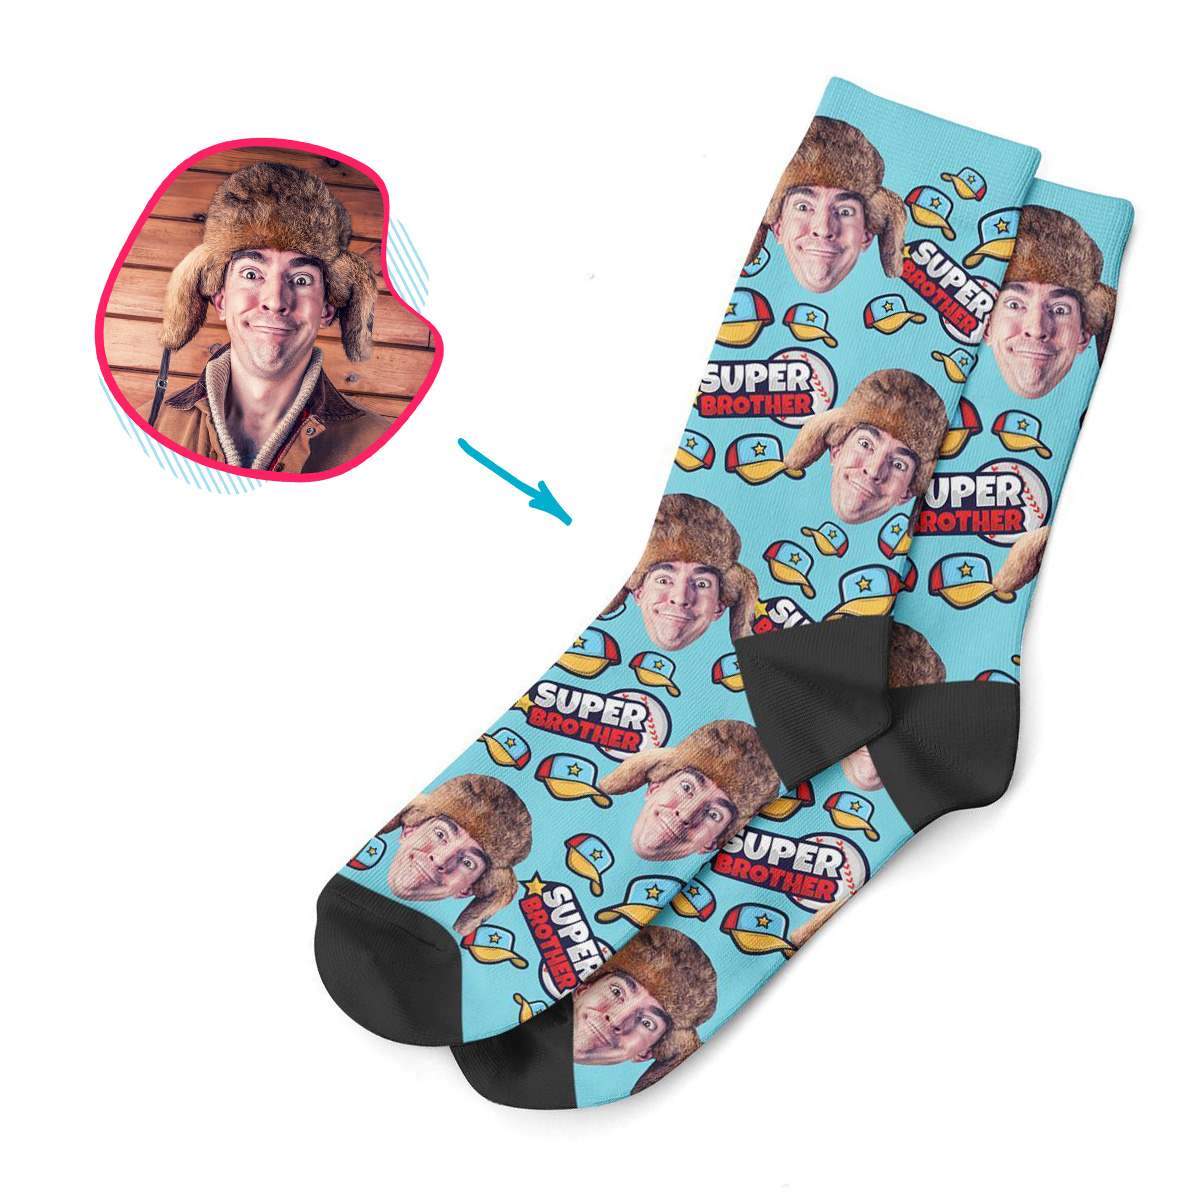 blue Super Brother socks personalized with photo of face printed on them